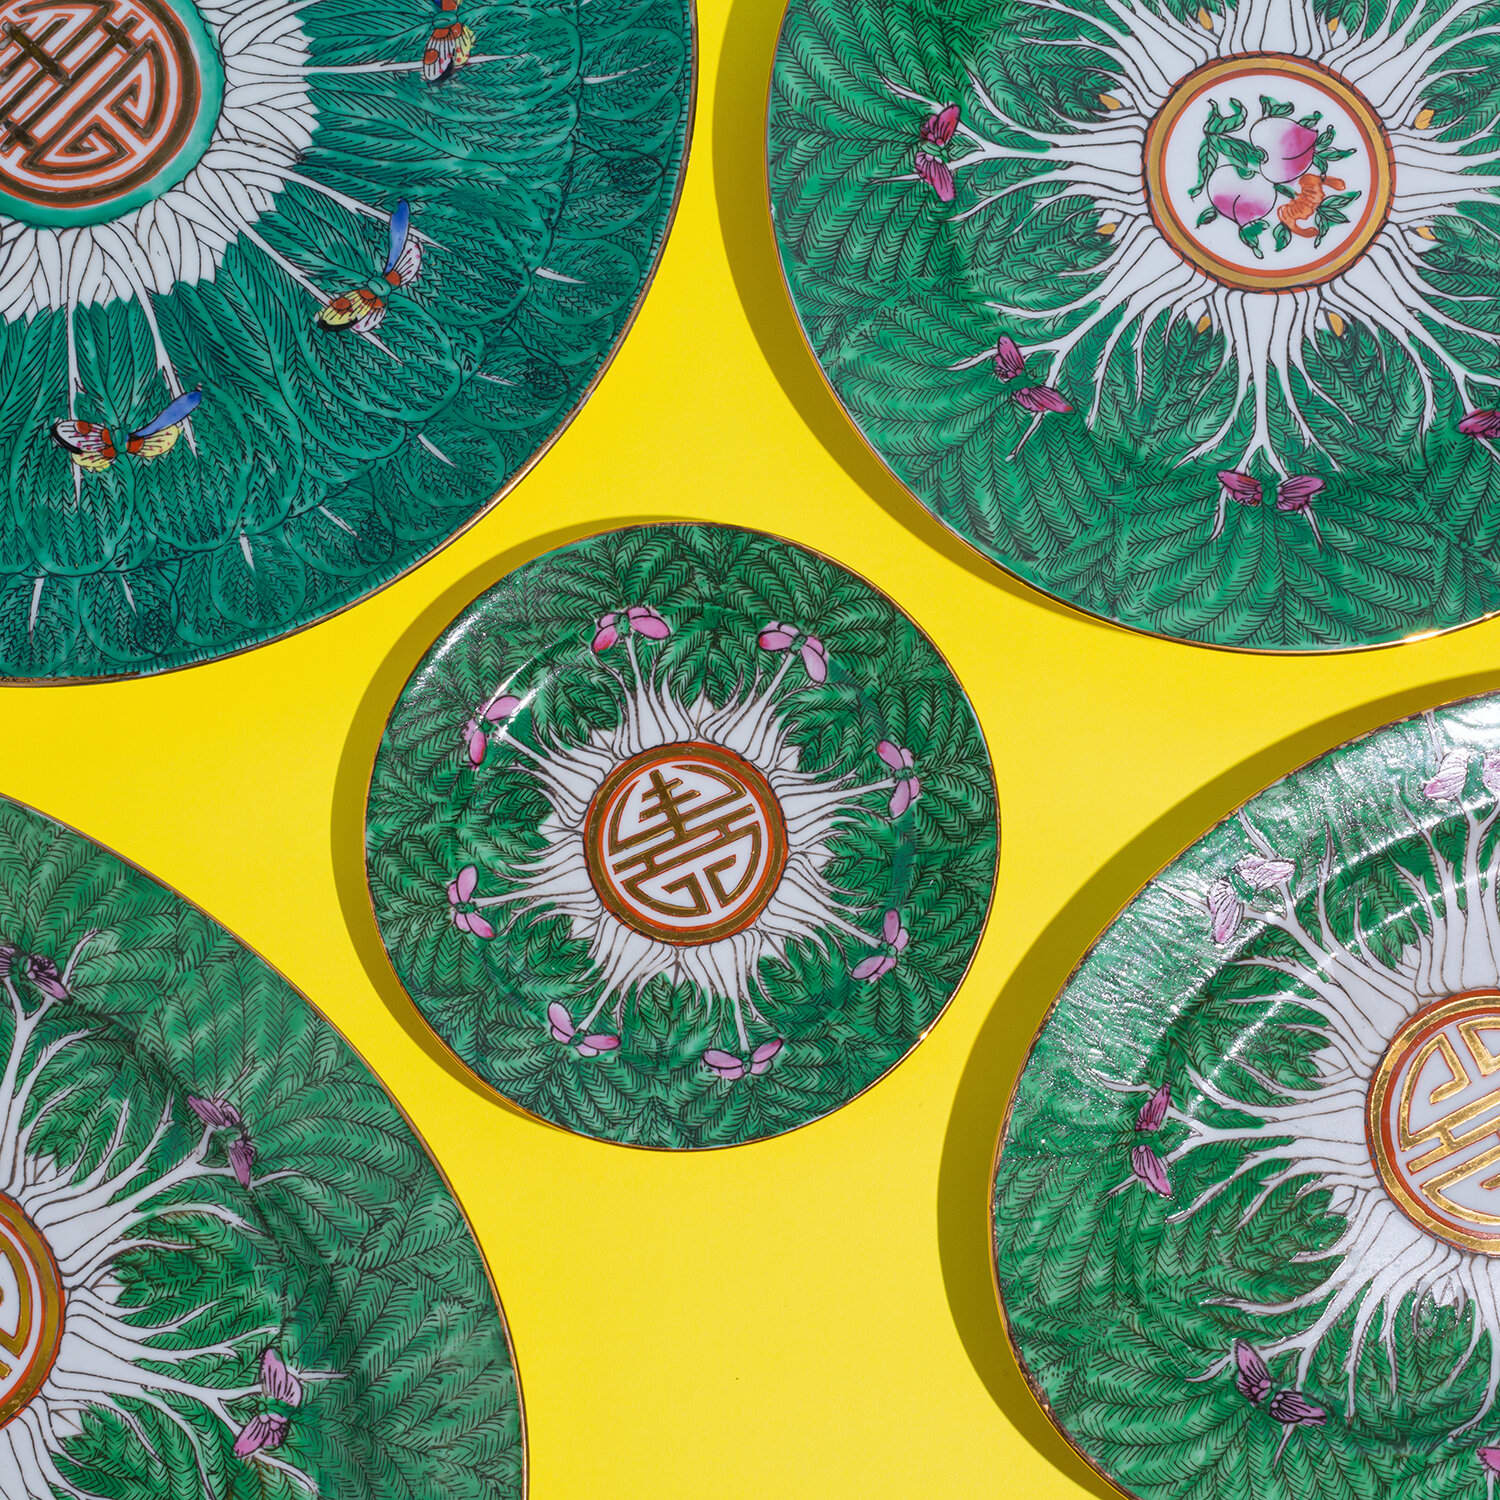 10 Great Holiday Gifts from New York's Chinatown